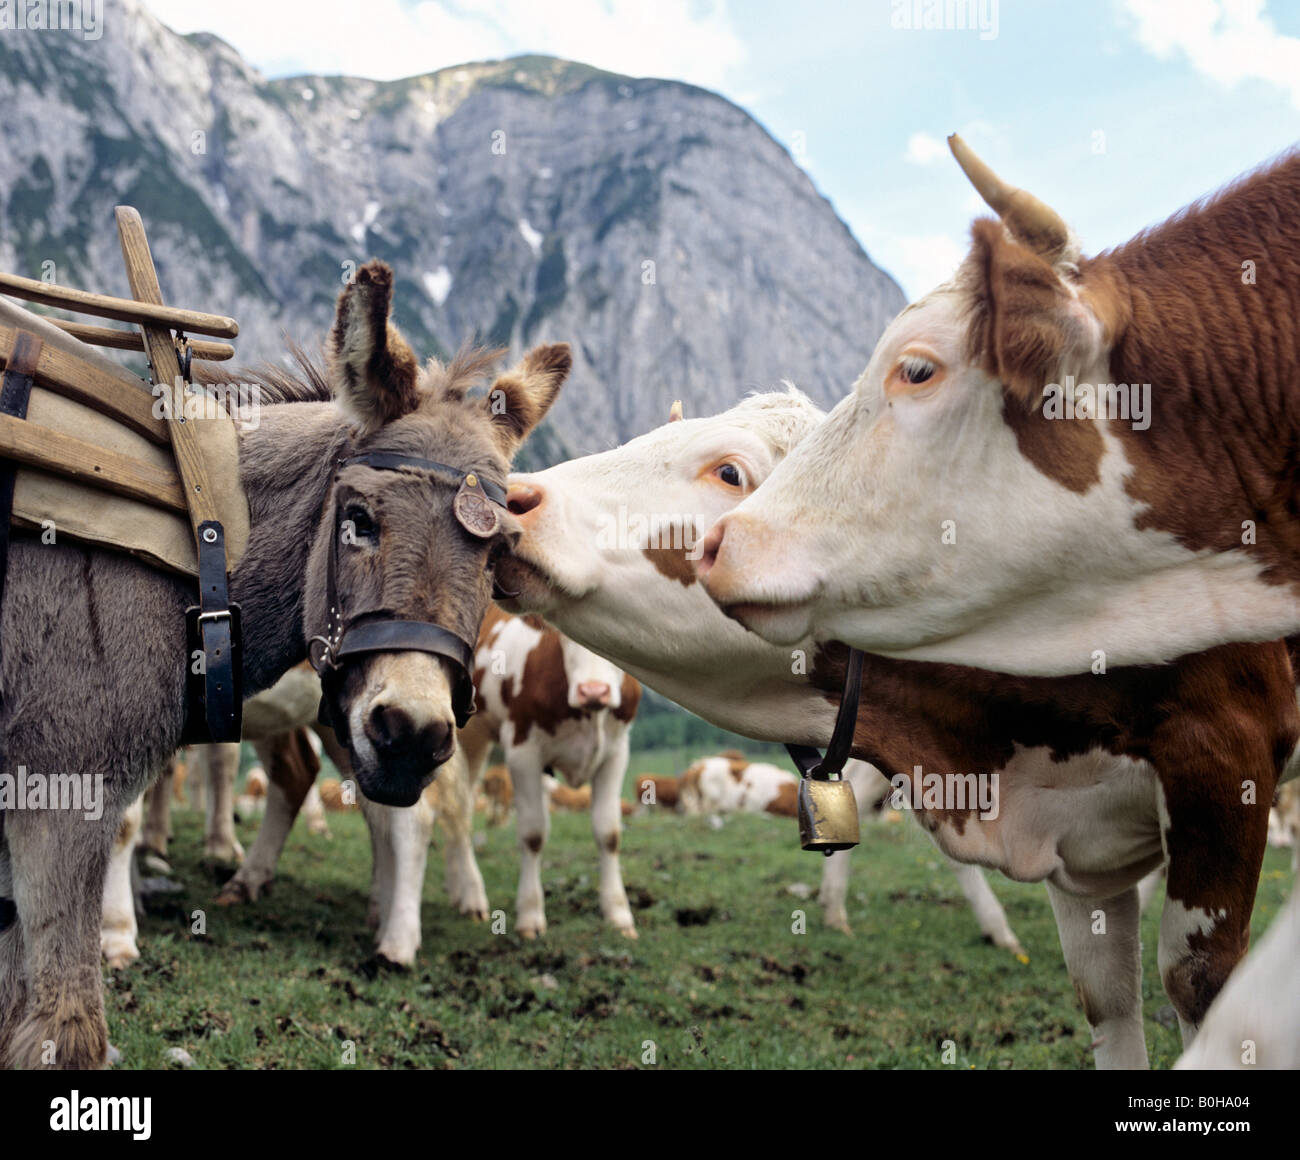 Display of tenderness between a donkey and a cow, Tirol, Austria Stock Photo